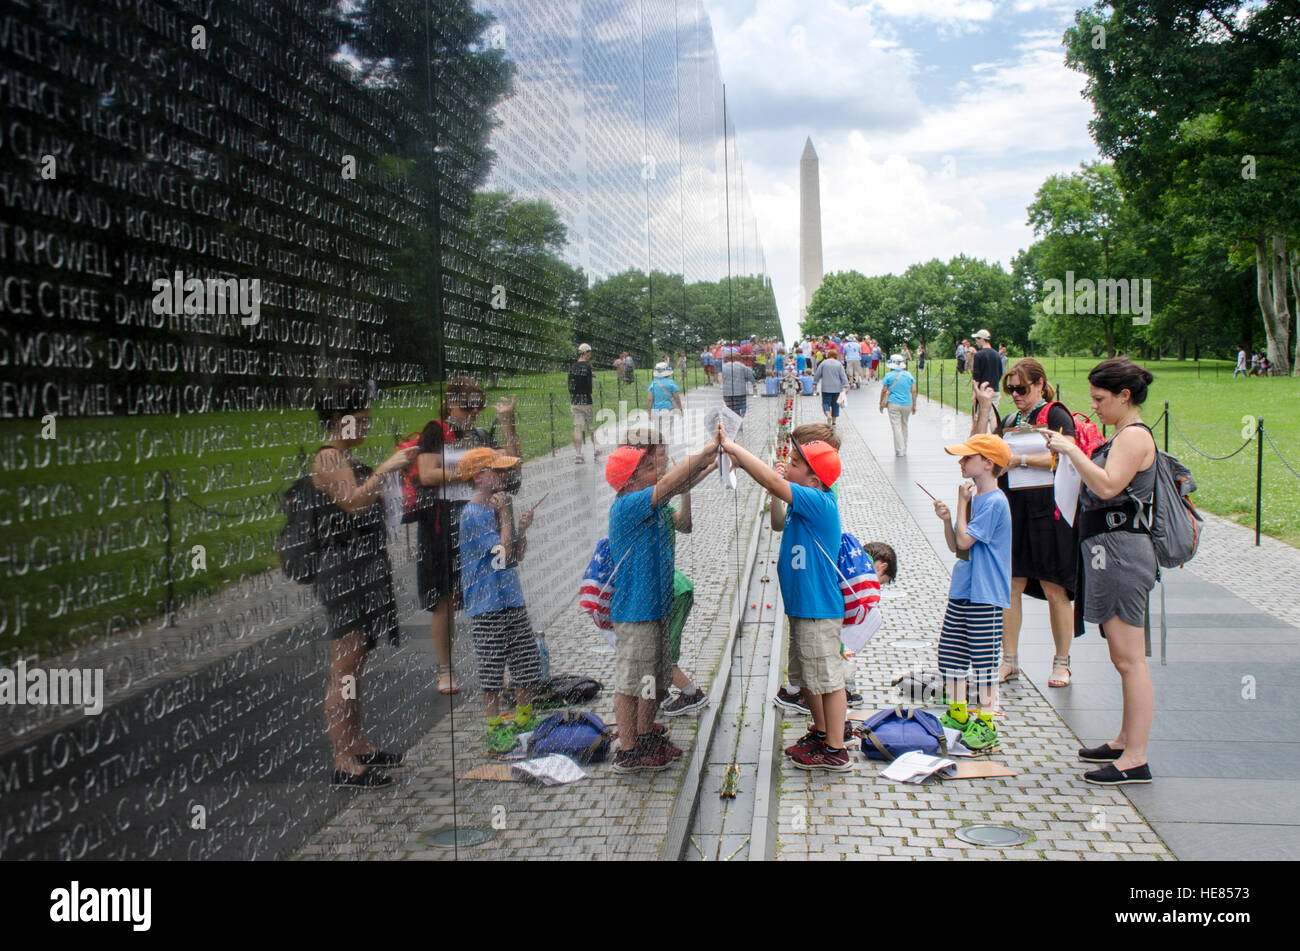 School children, with the help of their teacher, make pencil rubbings of names on the Vietnam Veterans Memorial wall. Stock Photo